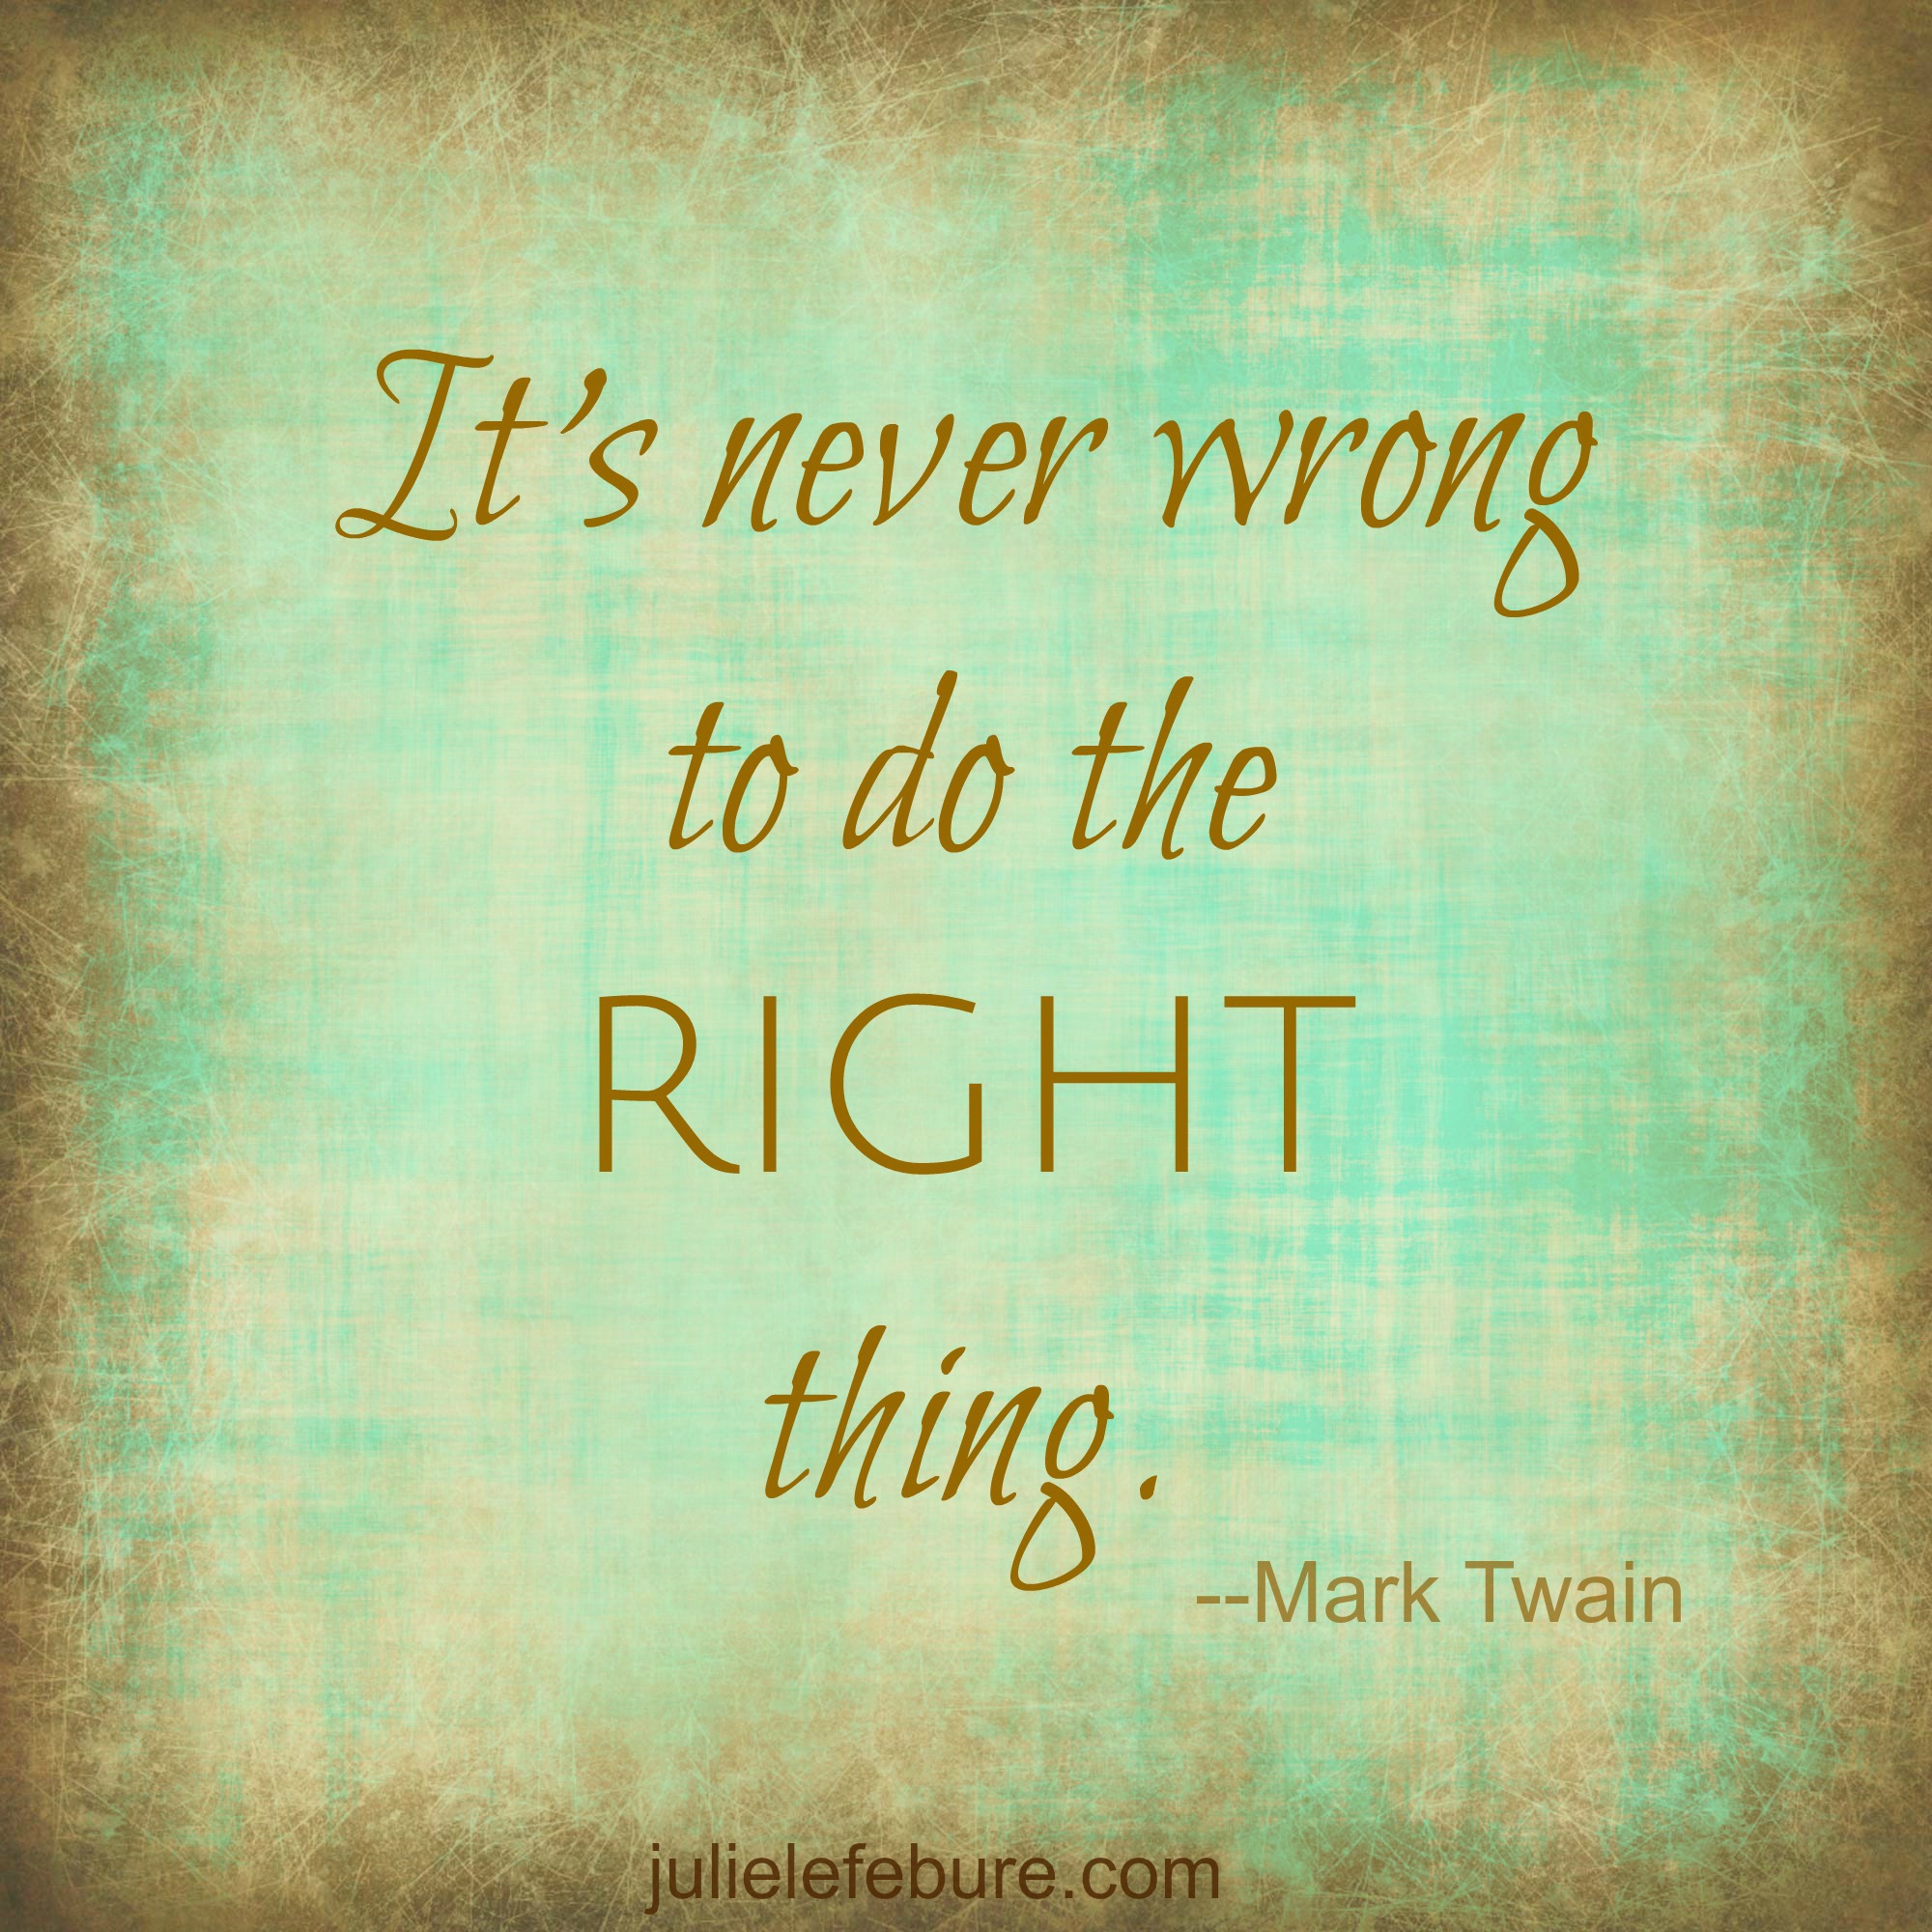 Never-wrong-to-do-the-right-thing.-edited.jpg